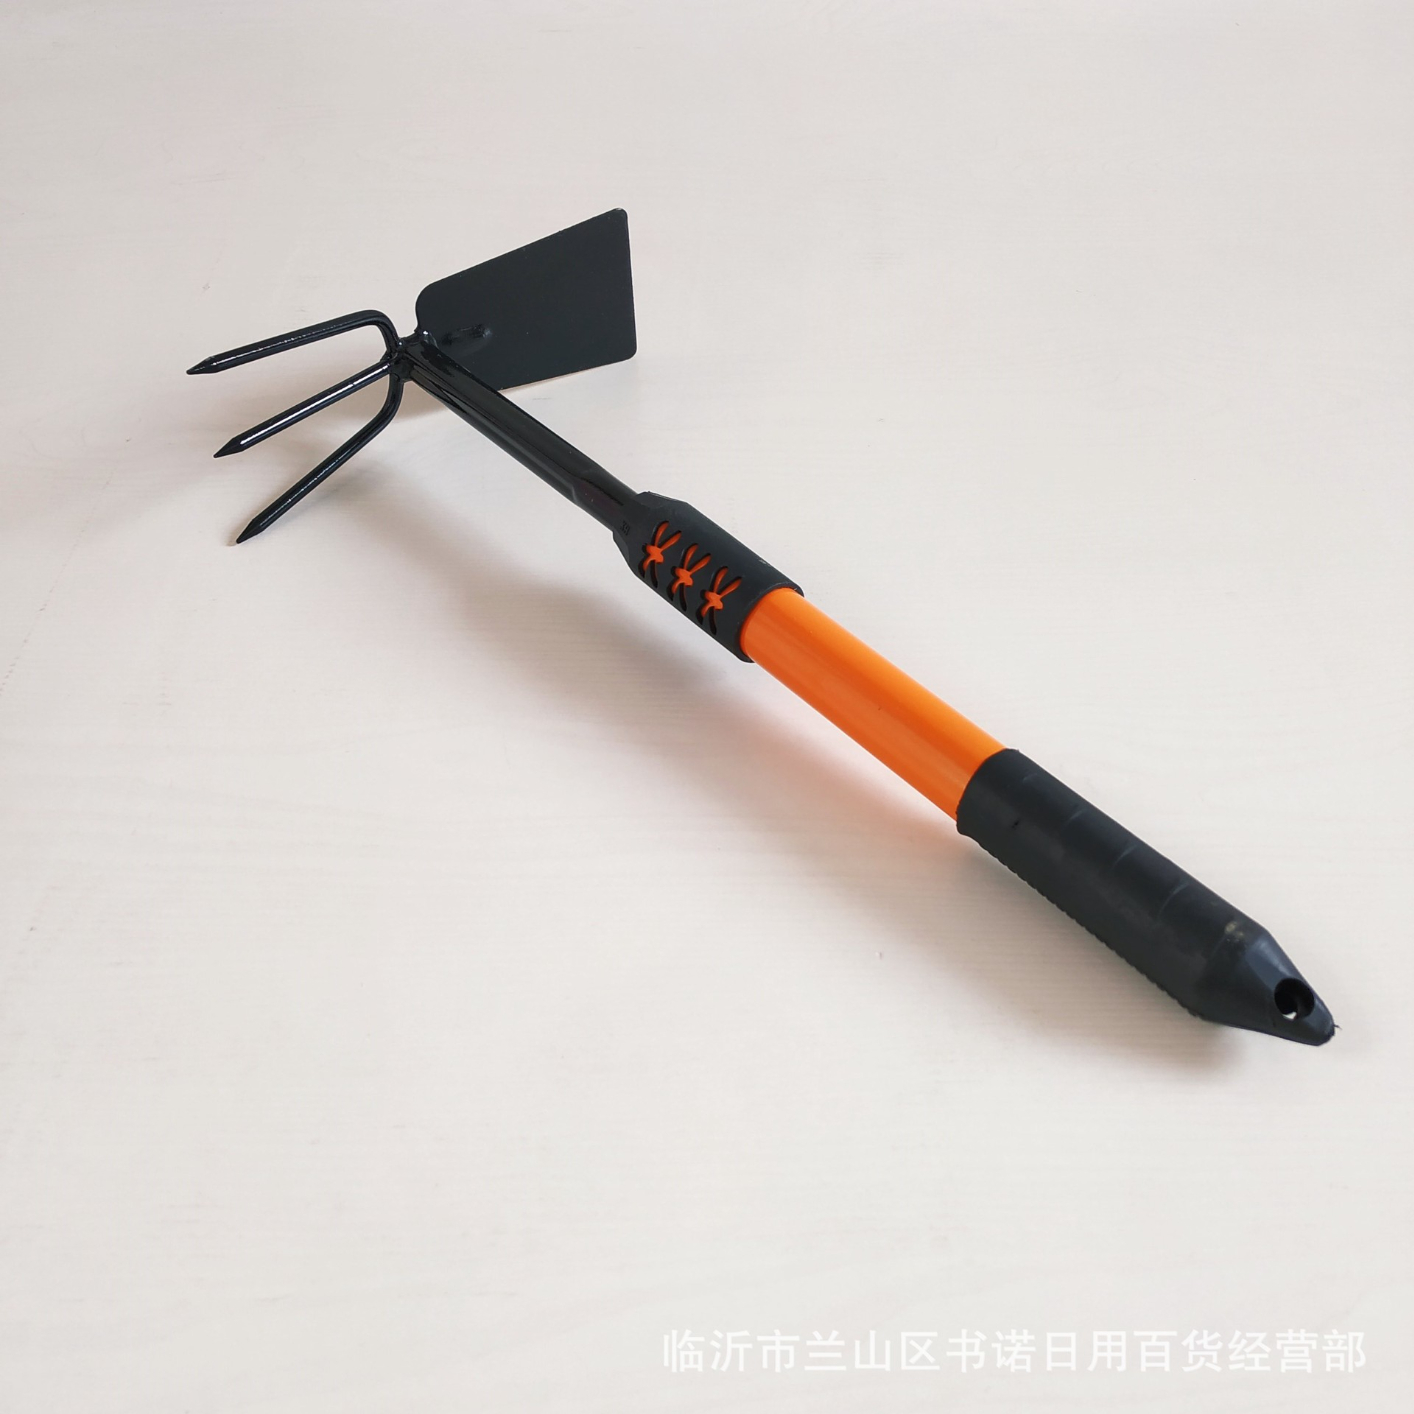 New rubber handle two-headed busy garden hoe three-tooth rake planting vegetables farming tools dual-use hoe wholesale
